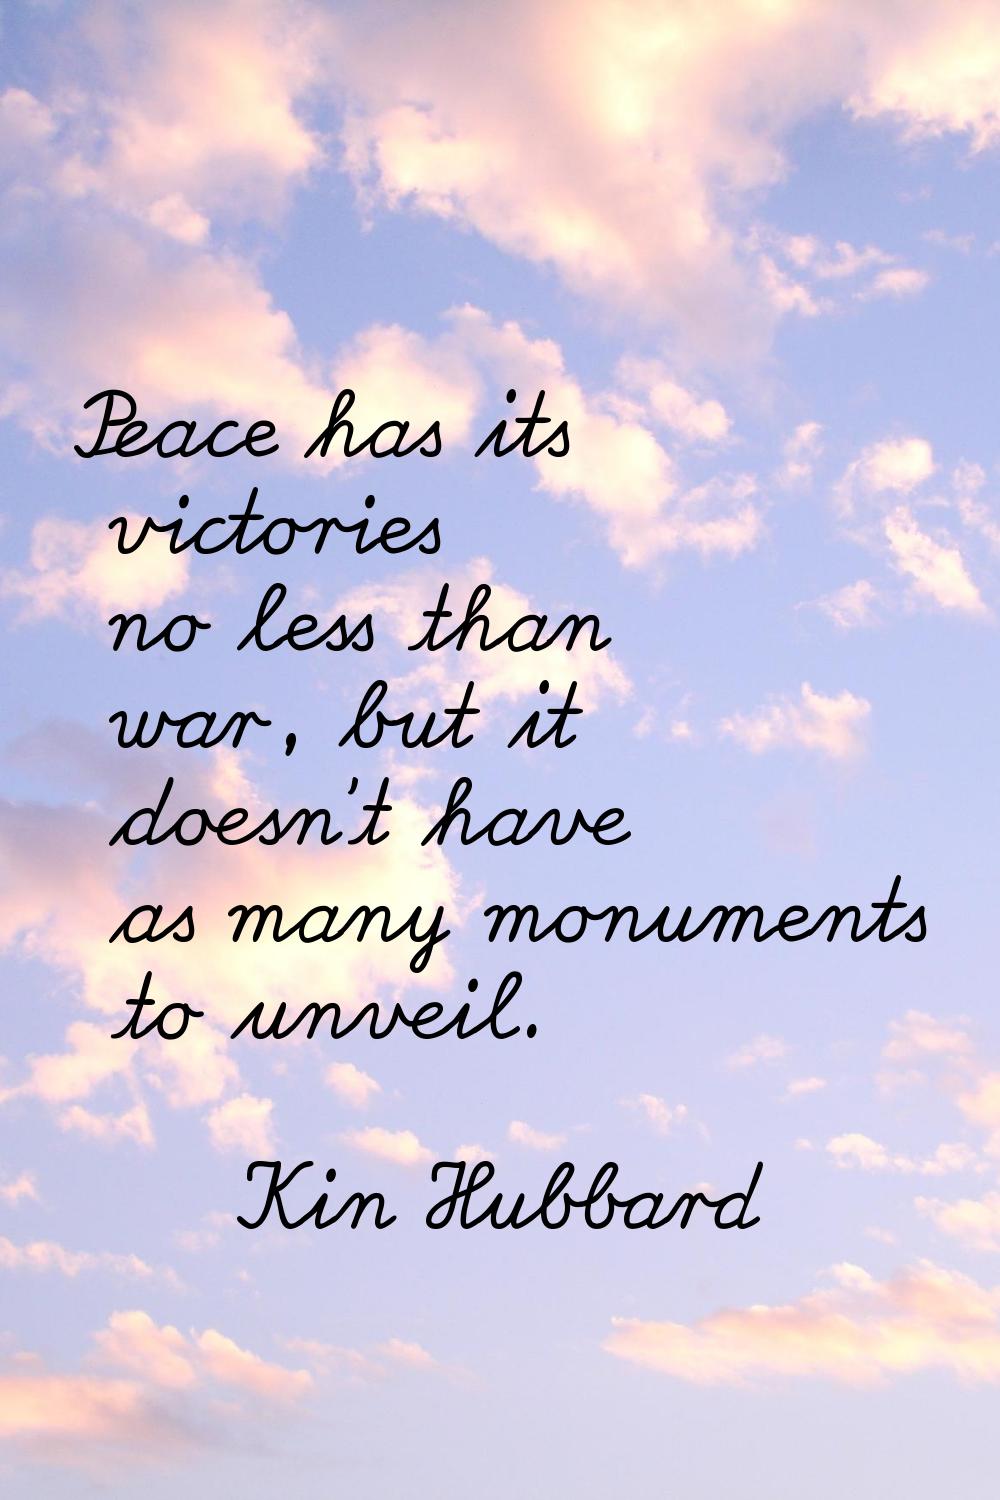 Peace has its victories no less than war, but it doesn't have as many monuments to unveil.